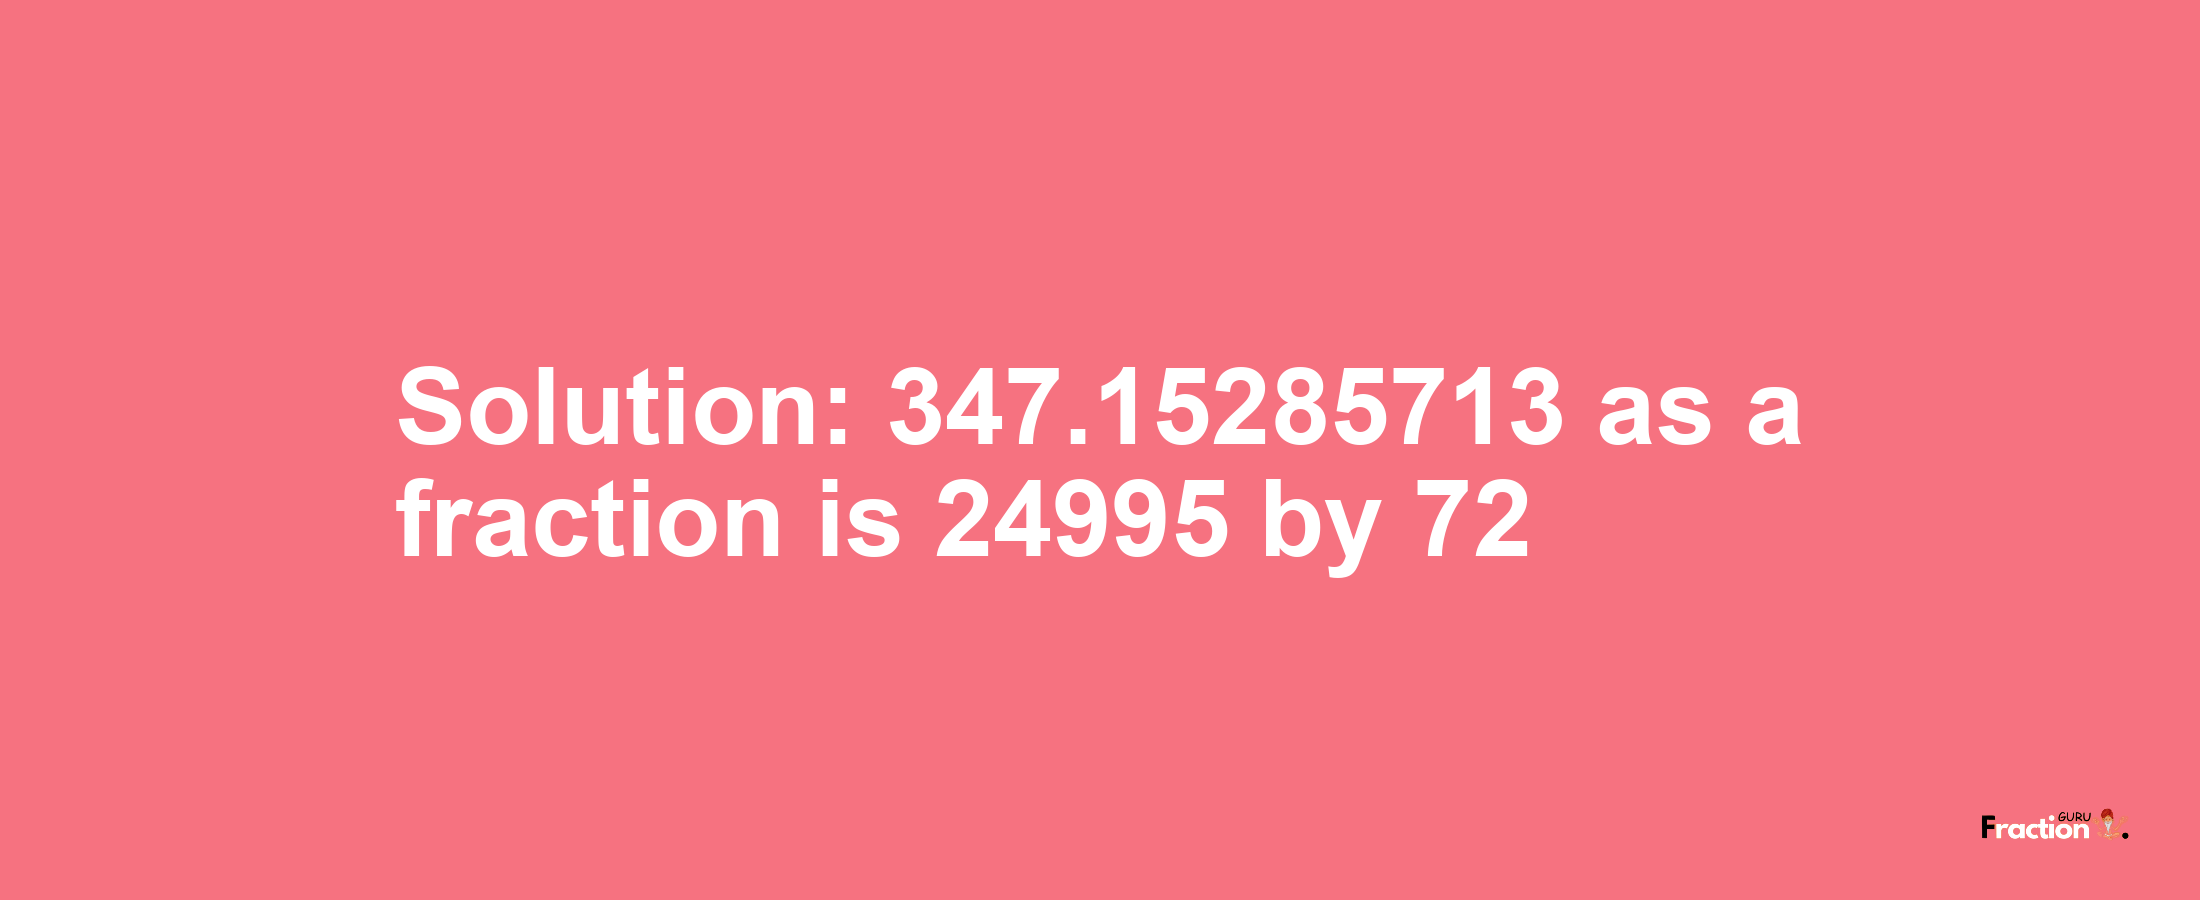 Solution:347.15285713 as a fraction is 24995/72